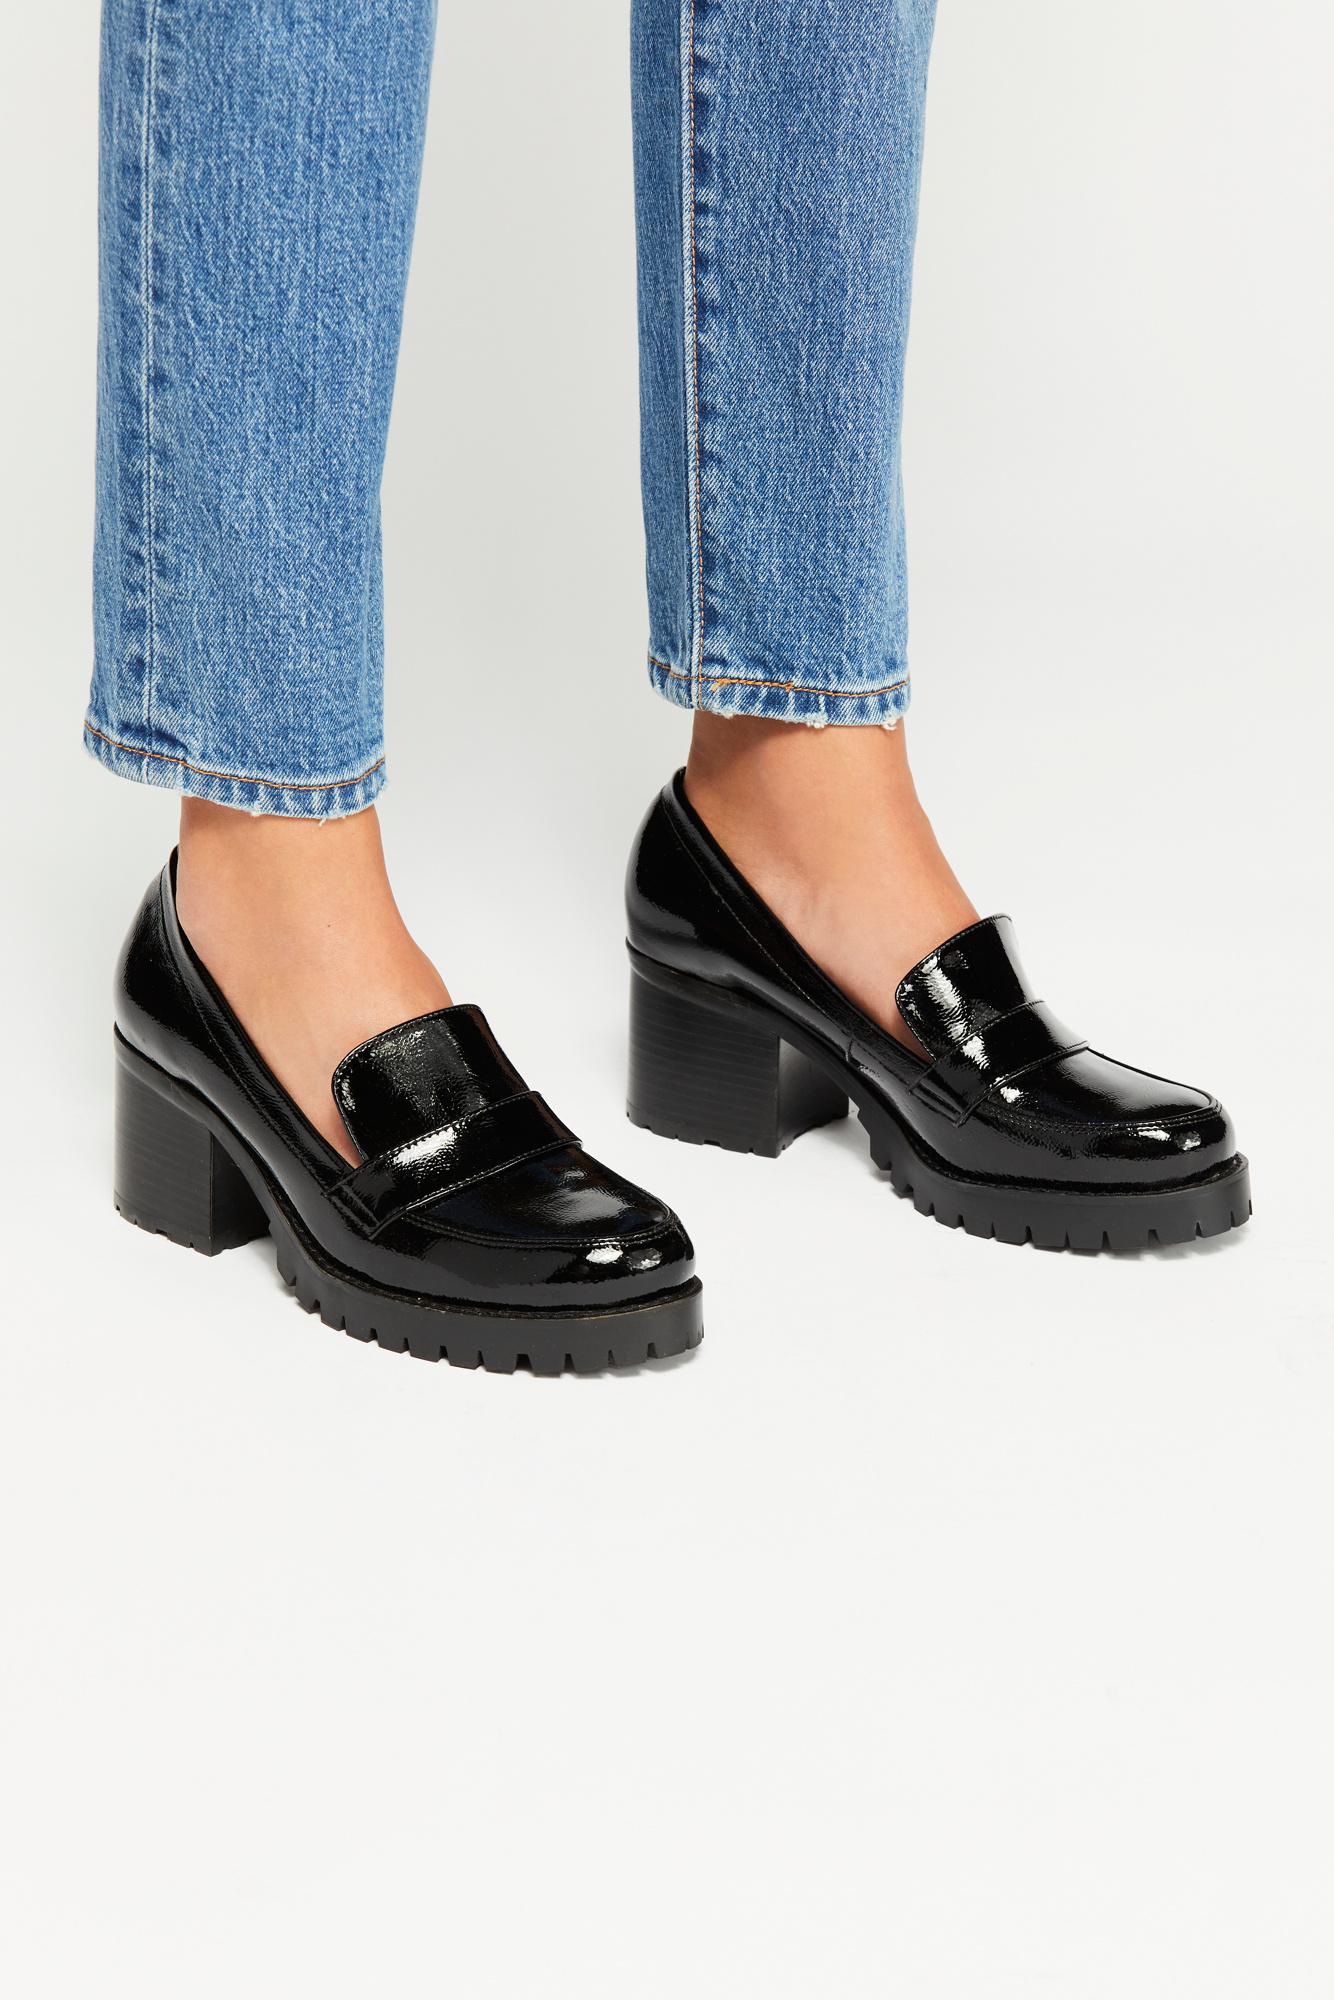 Free People Leather Lexden Block Heel Loafer By Jane & The Shoe in ...